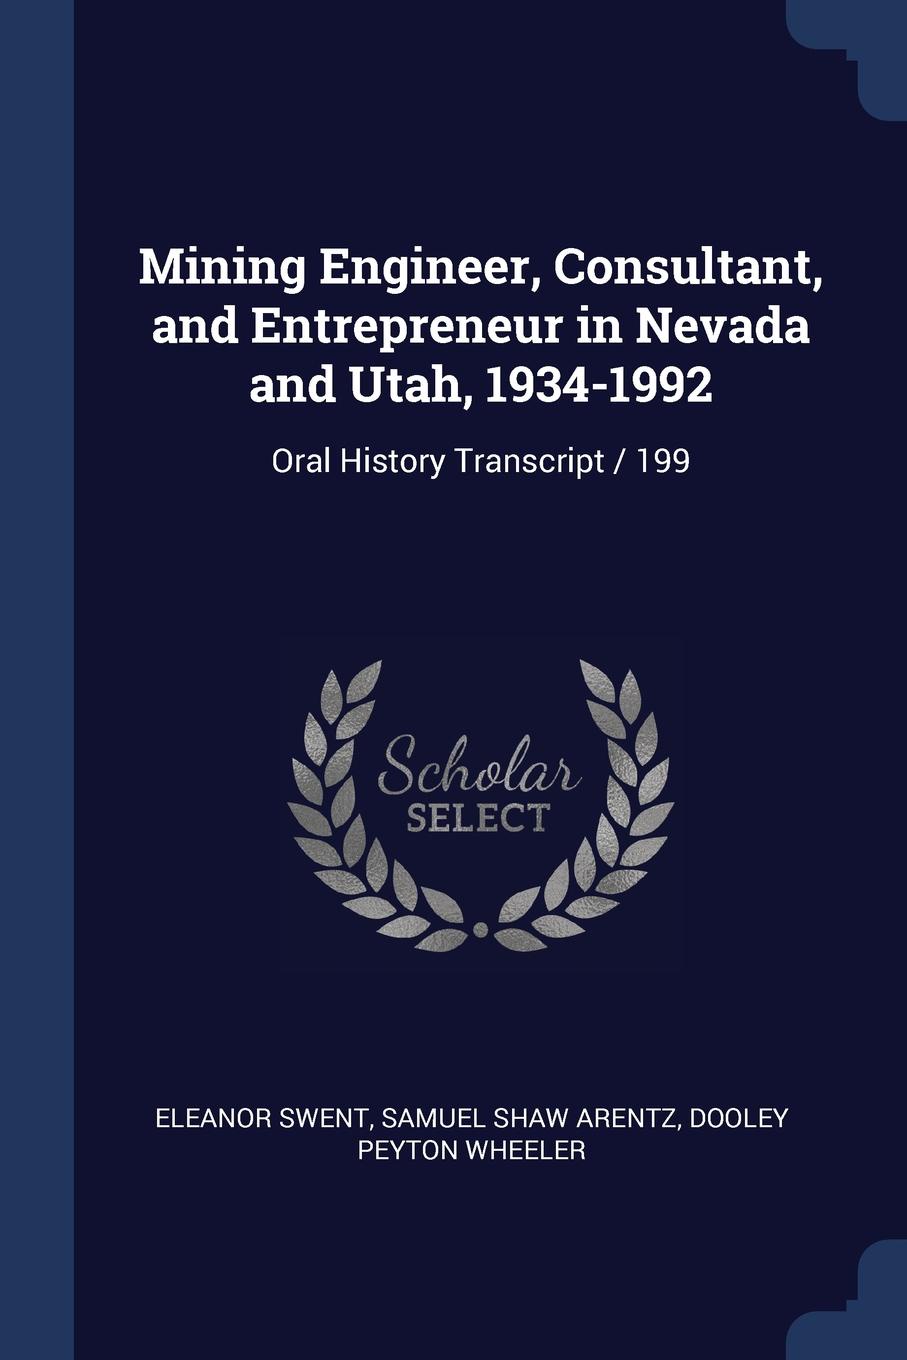 Mining Engineer, Consultant, and Entrepreneur in Nevada and Utah, 1934-1992. Oral History Transcript / 199